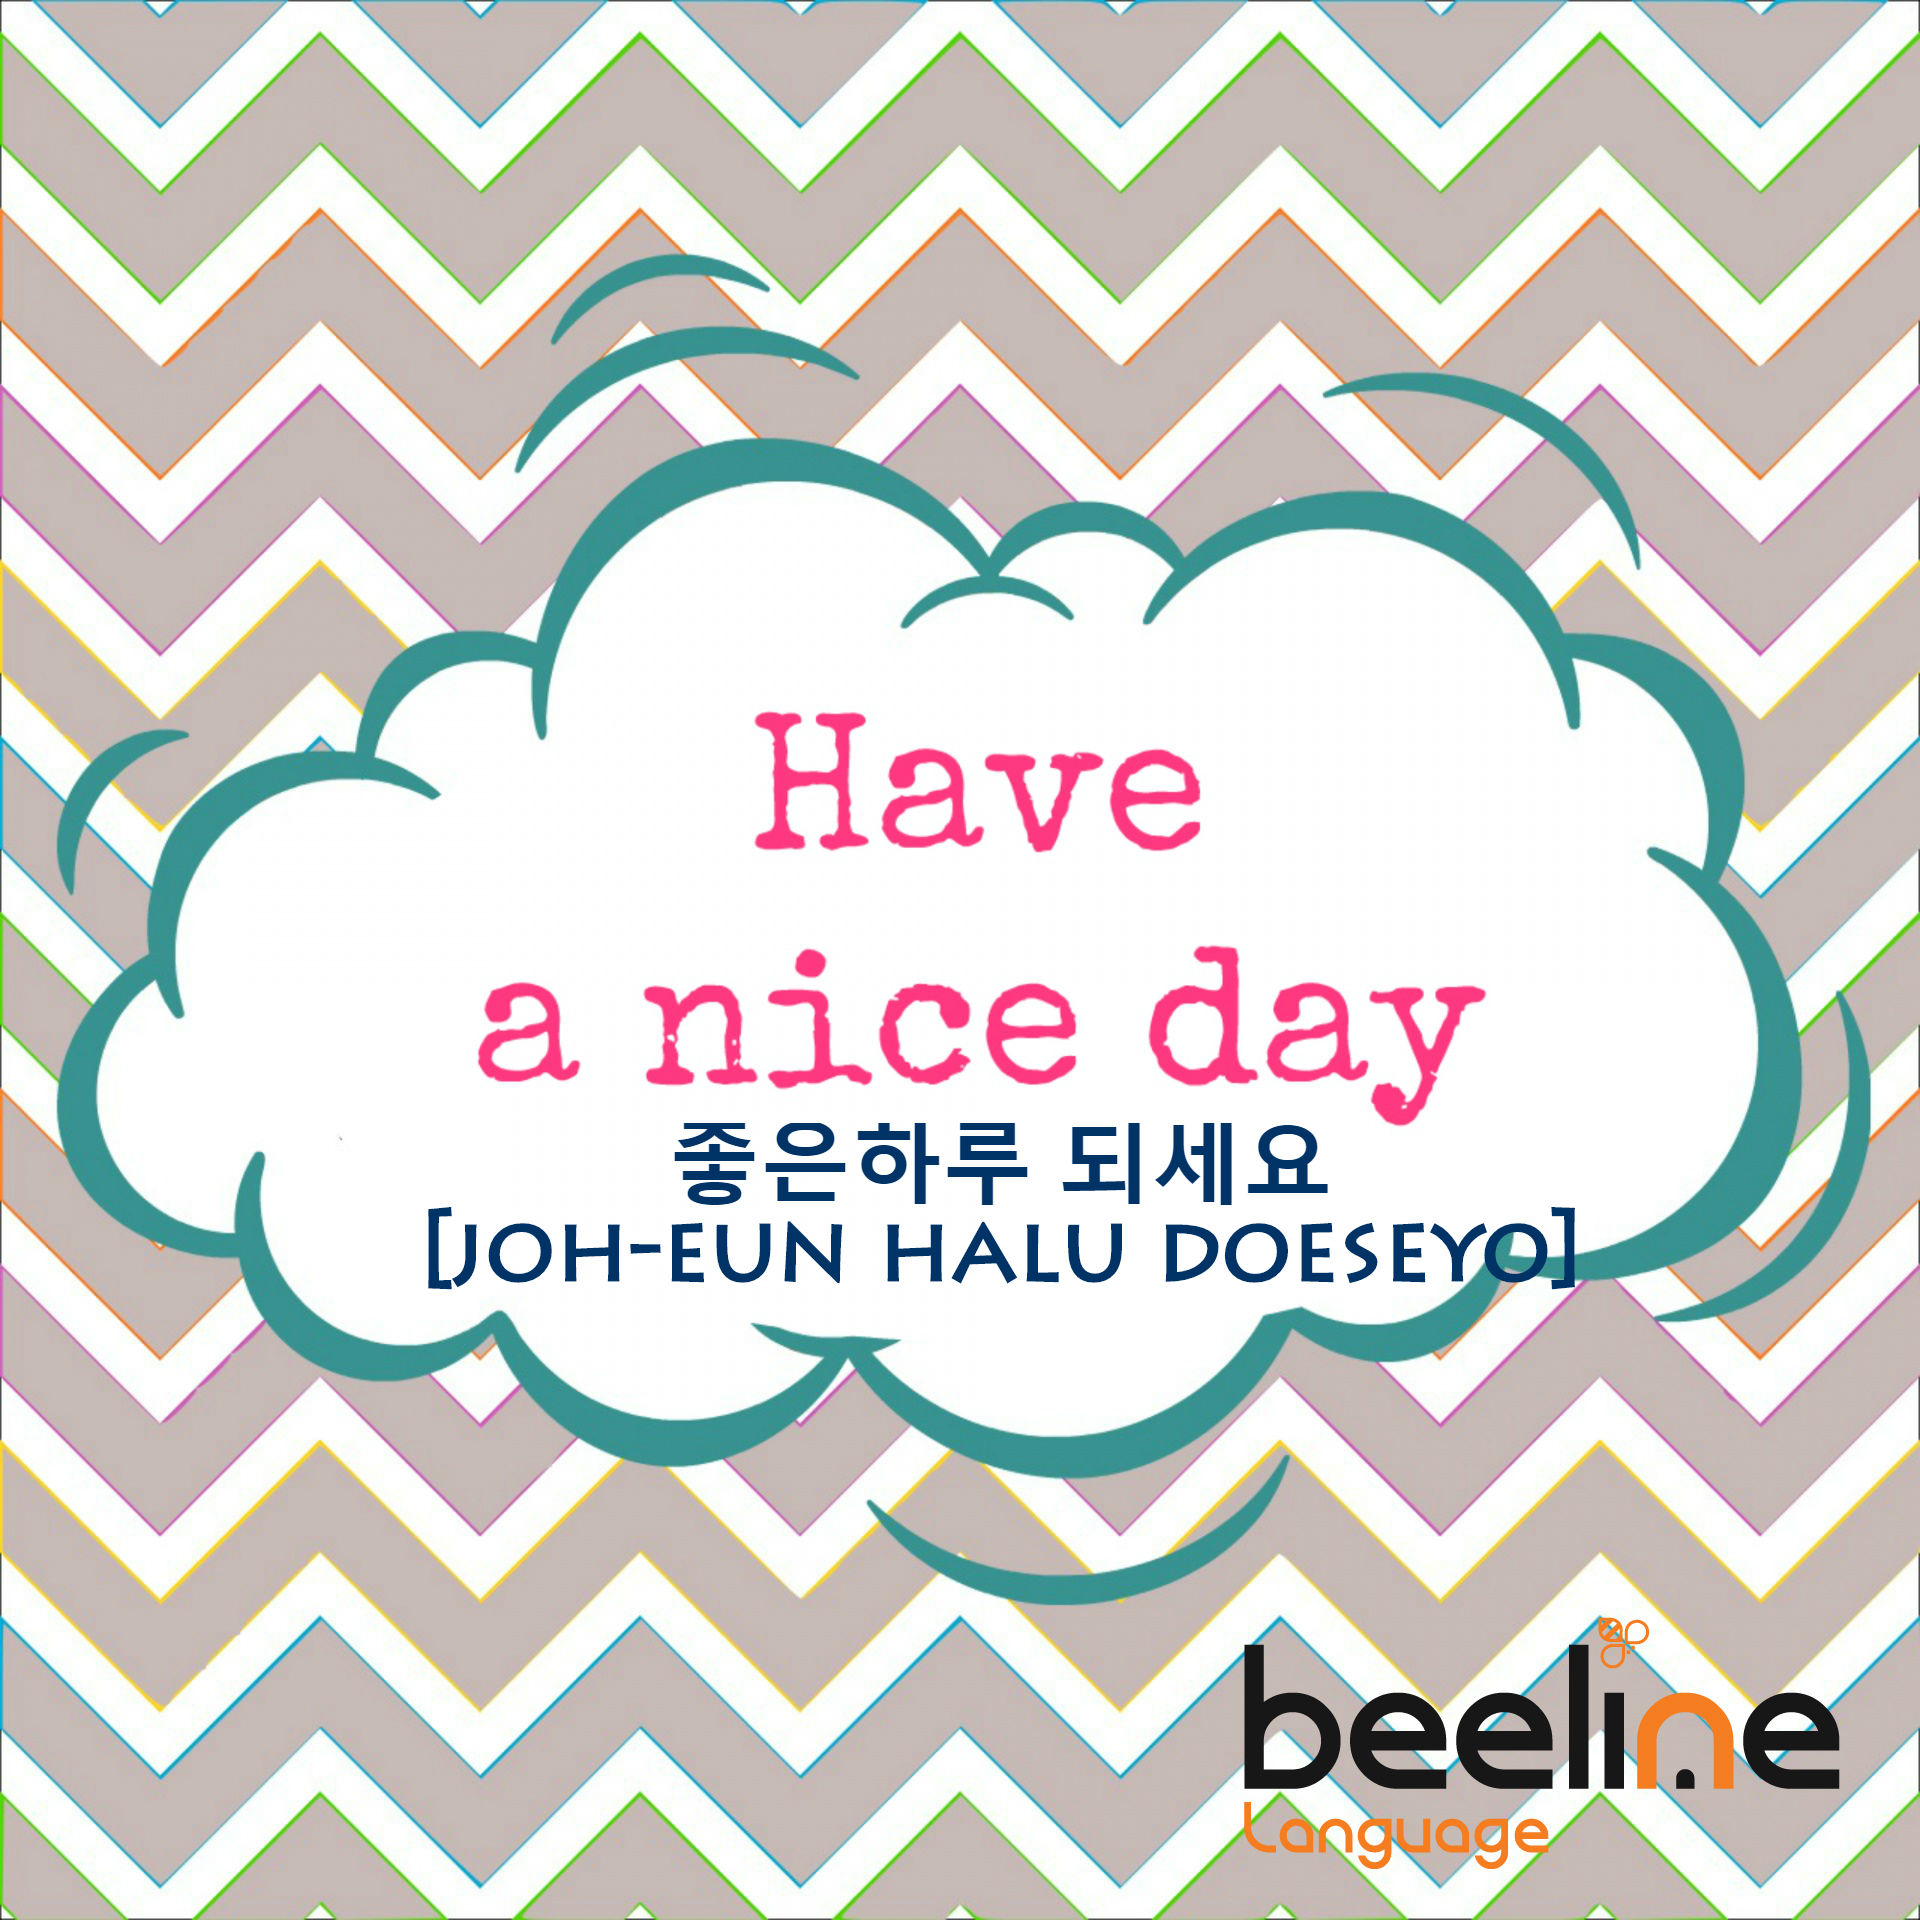 have a nice day in Korean